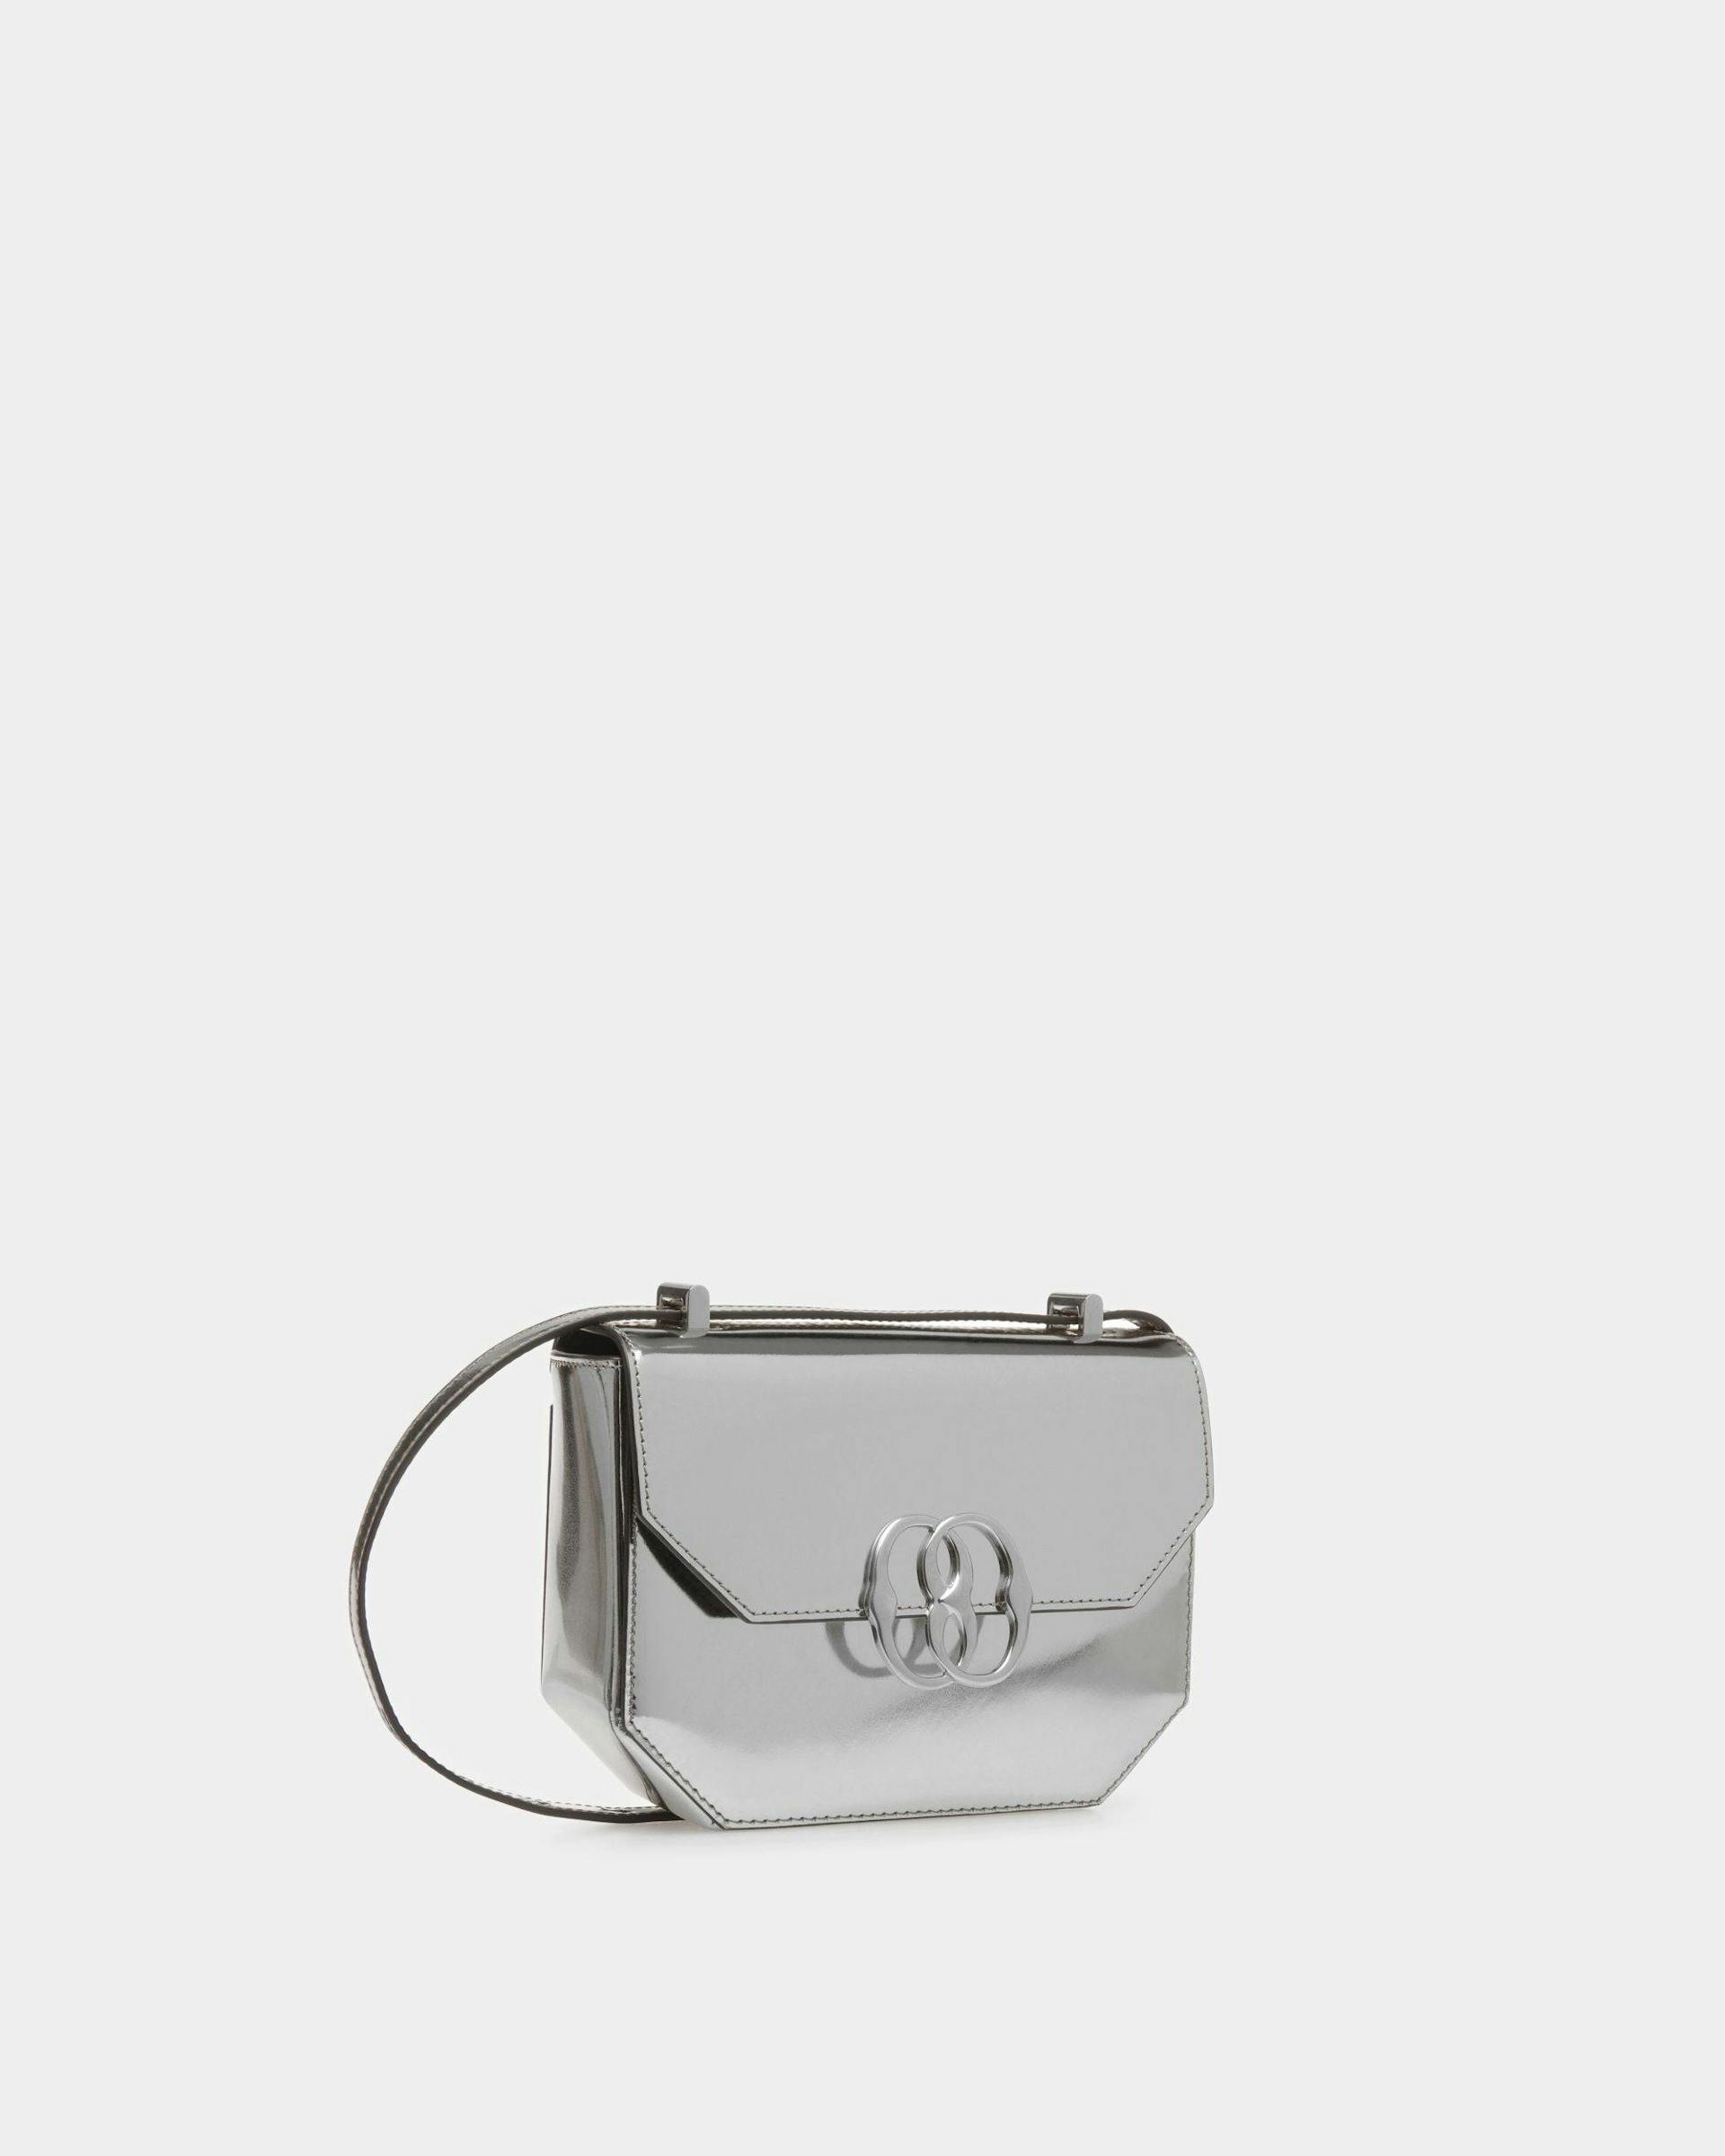 Women's Emblem Minibag In Silver Leather | Bally | Still Life 3/4 Front